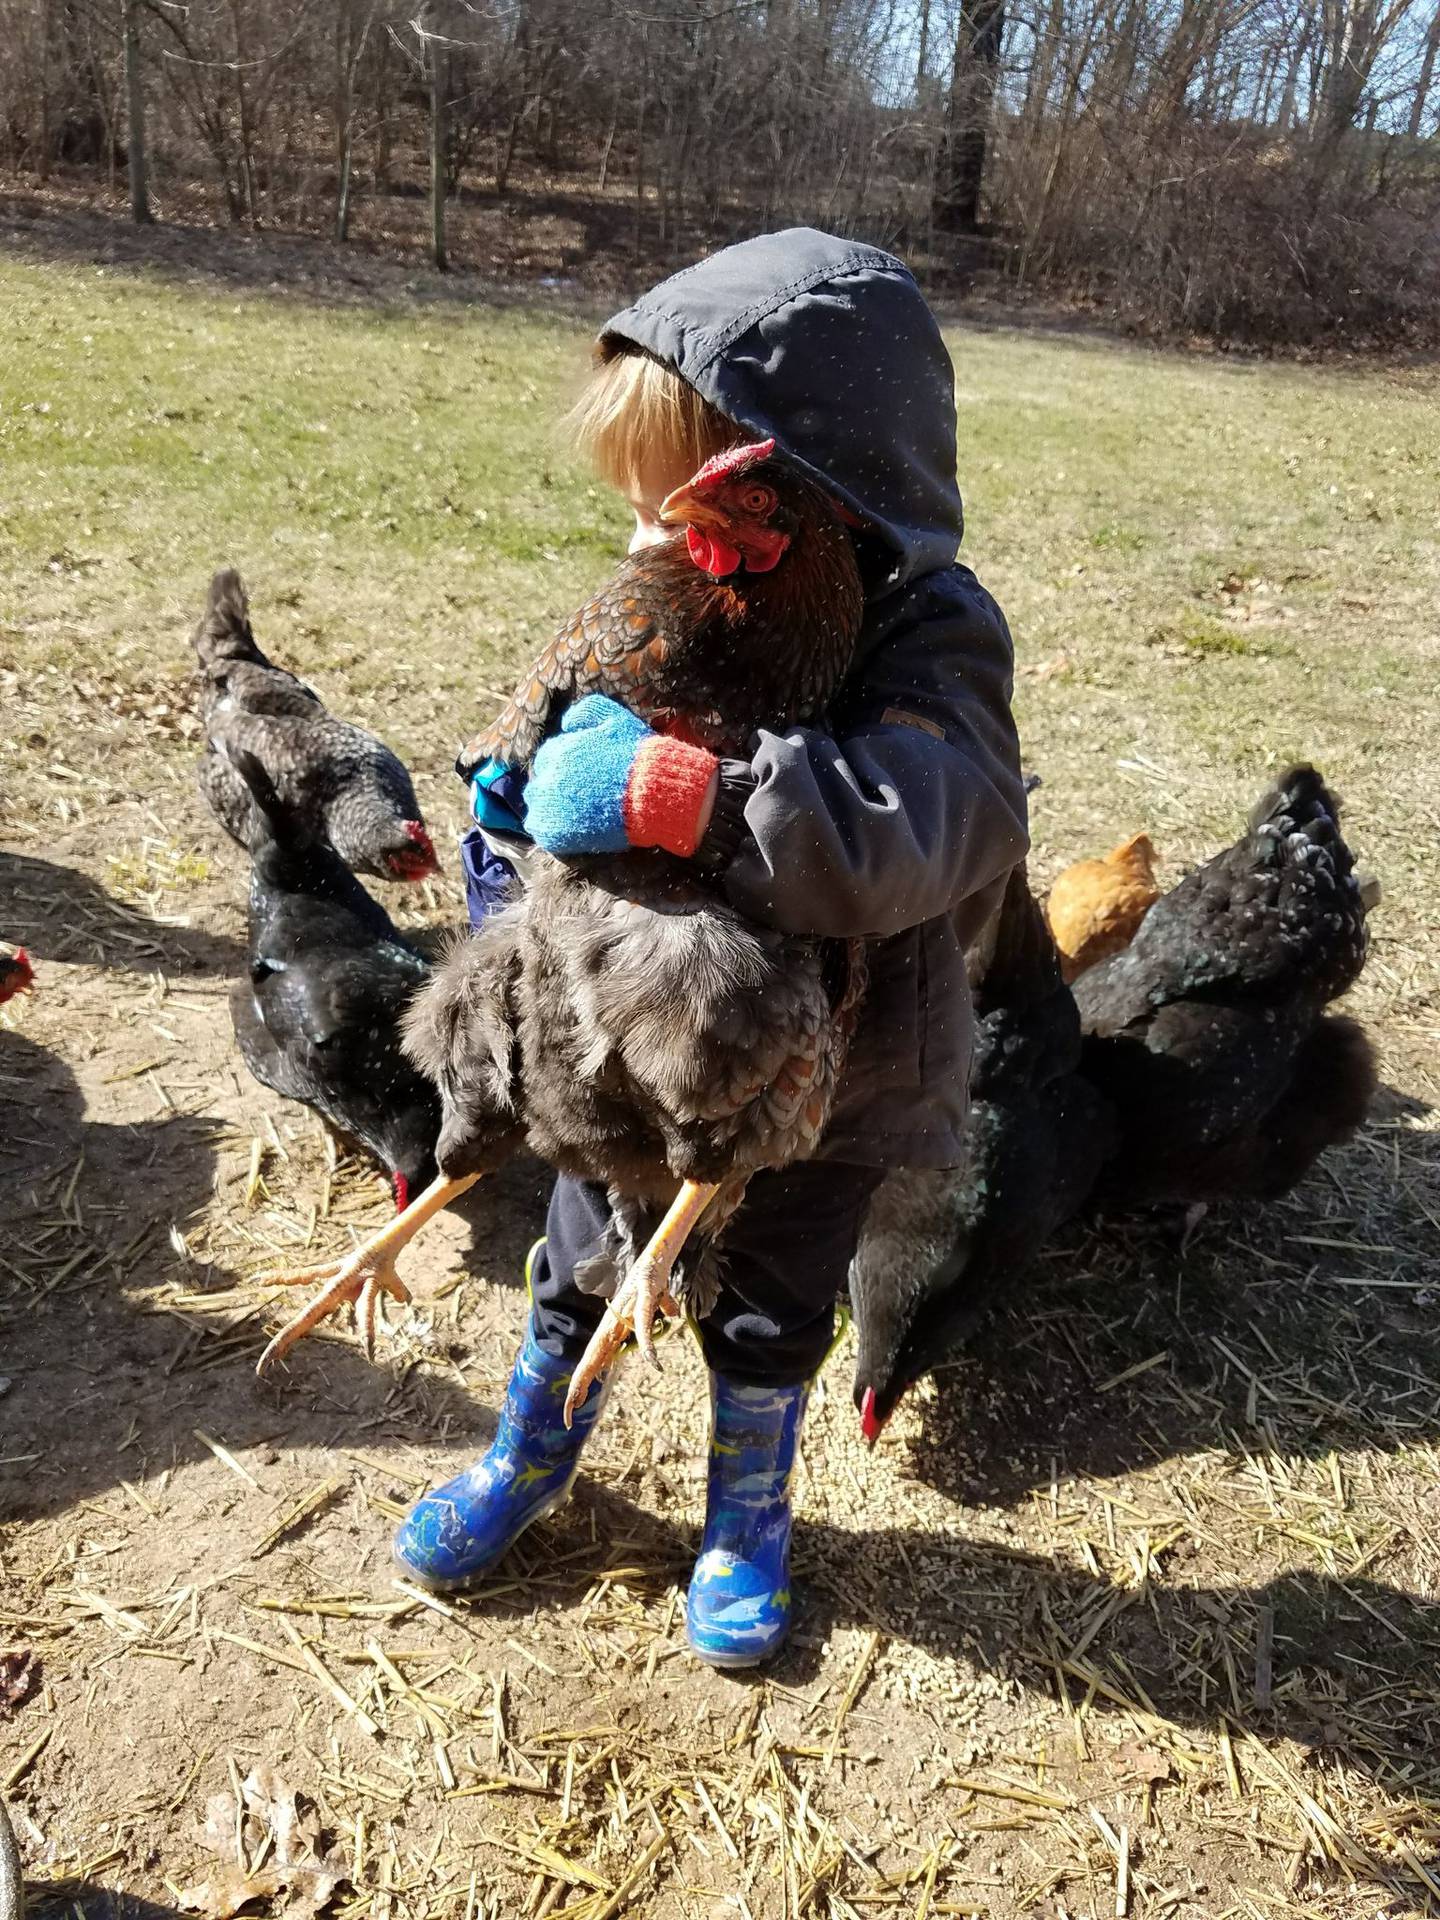 Chickens may go outside when they are fully featured, at approximately 9 weeks of age. Nola Mata of Braidwood and formerly of Wilmington, raised chickens in her backyard from 2014 to 2021. She felt the eggs looked and tasted fresher than store-bought eggs and her young sons (Julian is pictured) loved the experience.